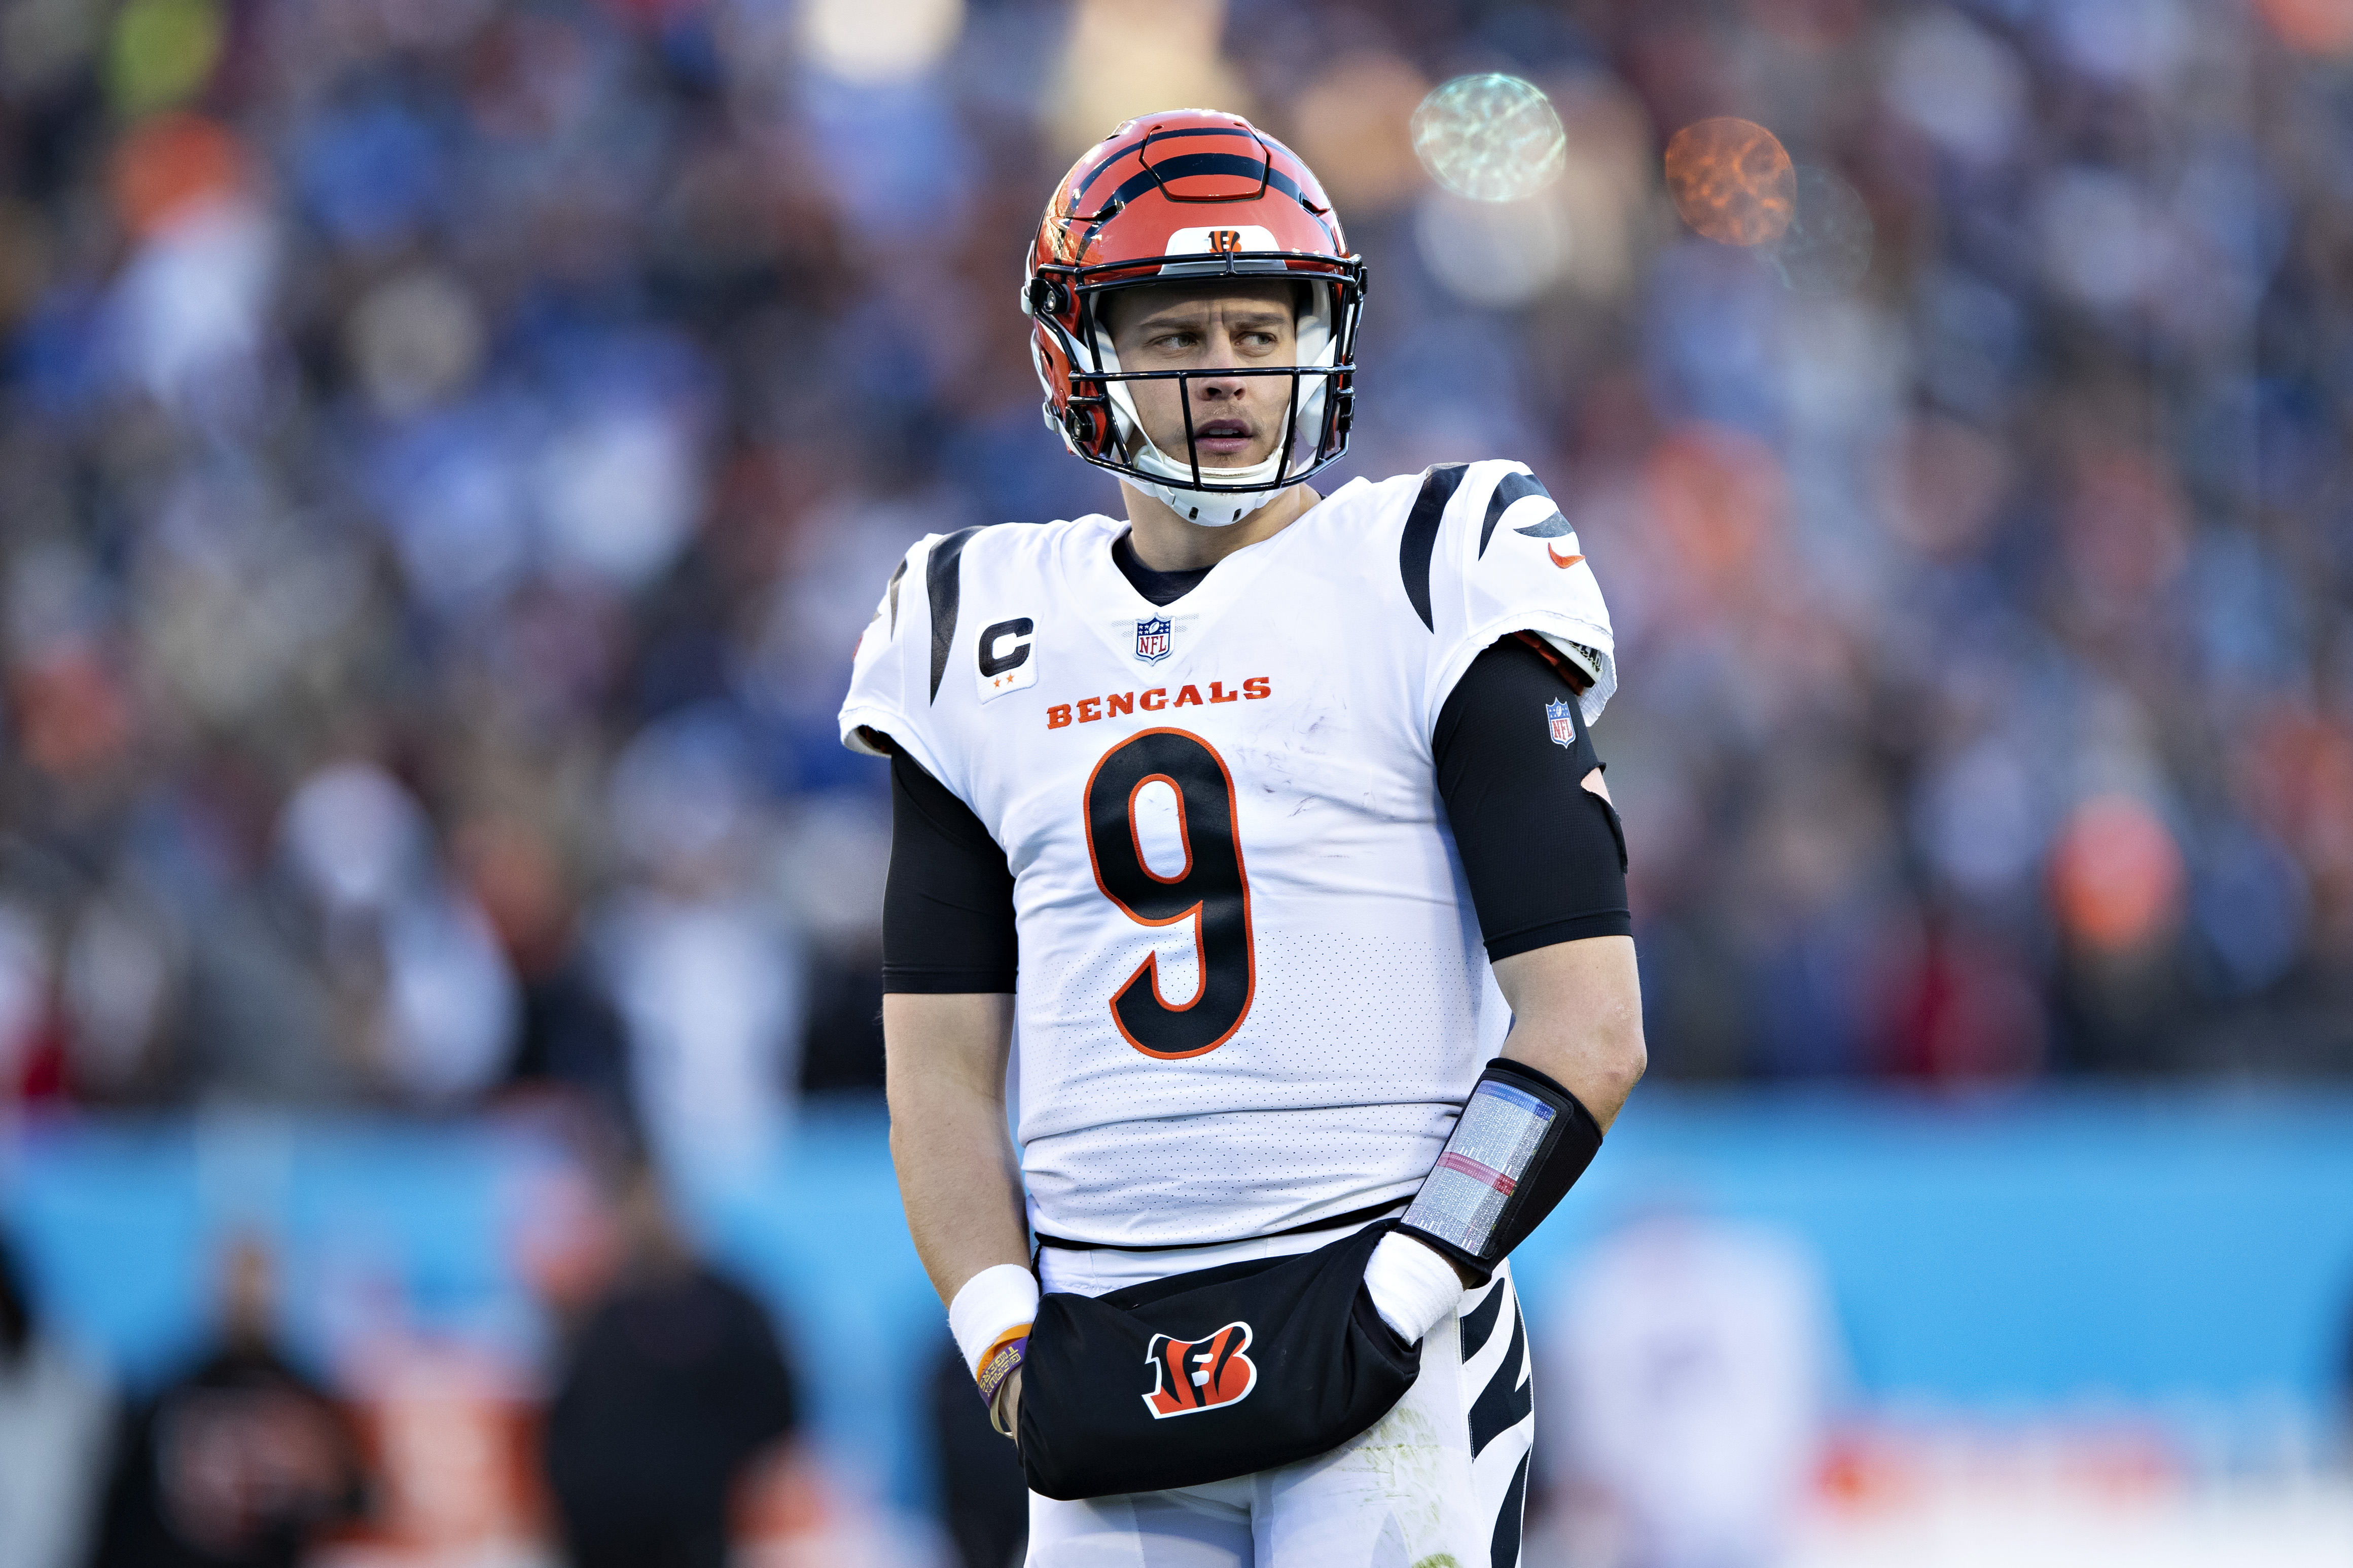 Bengals QB Joe Burrow looks on during game against the Titans